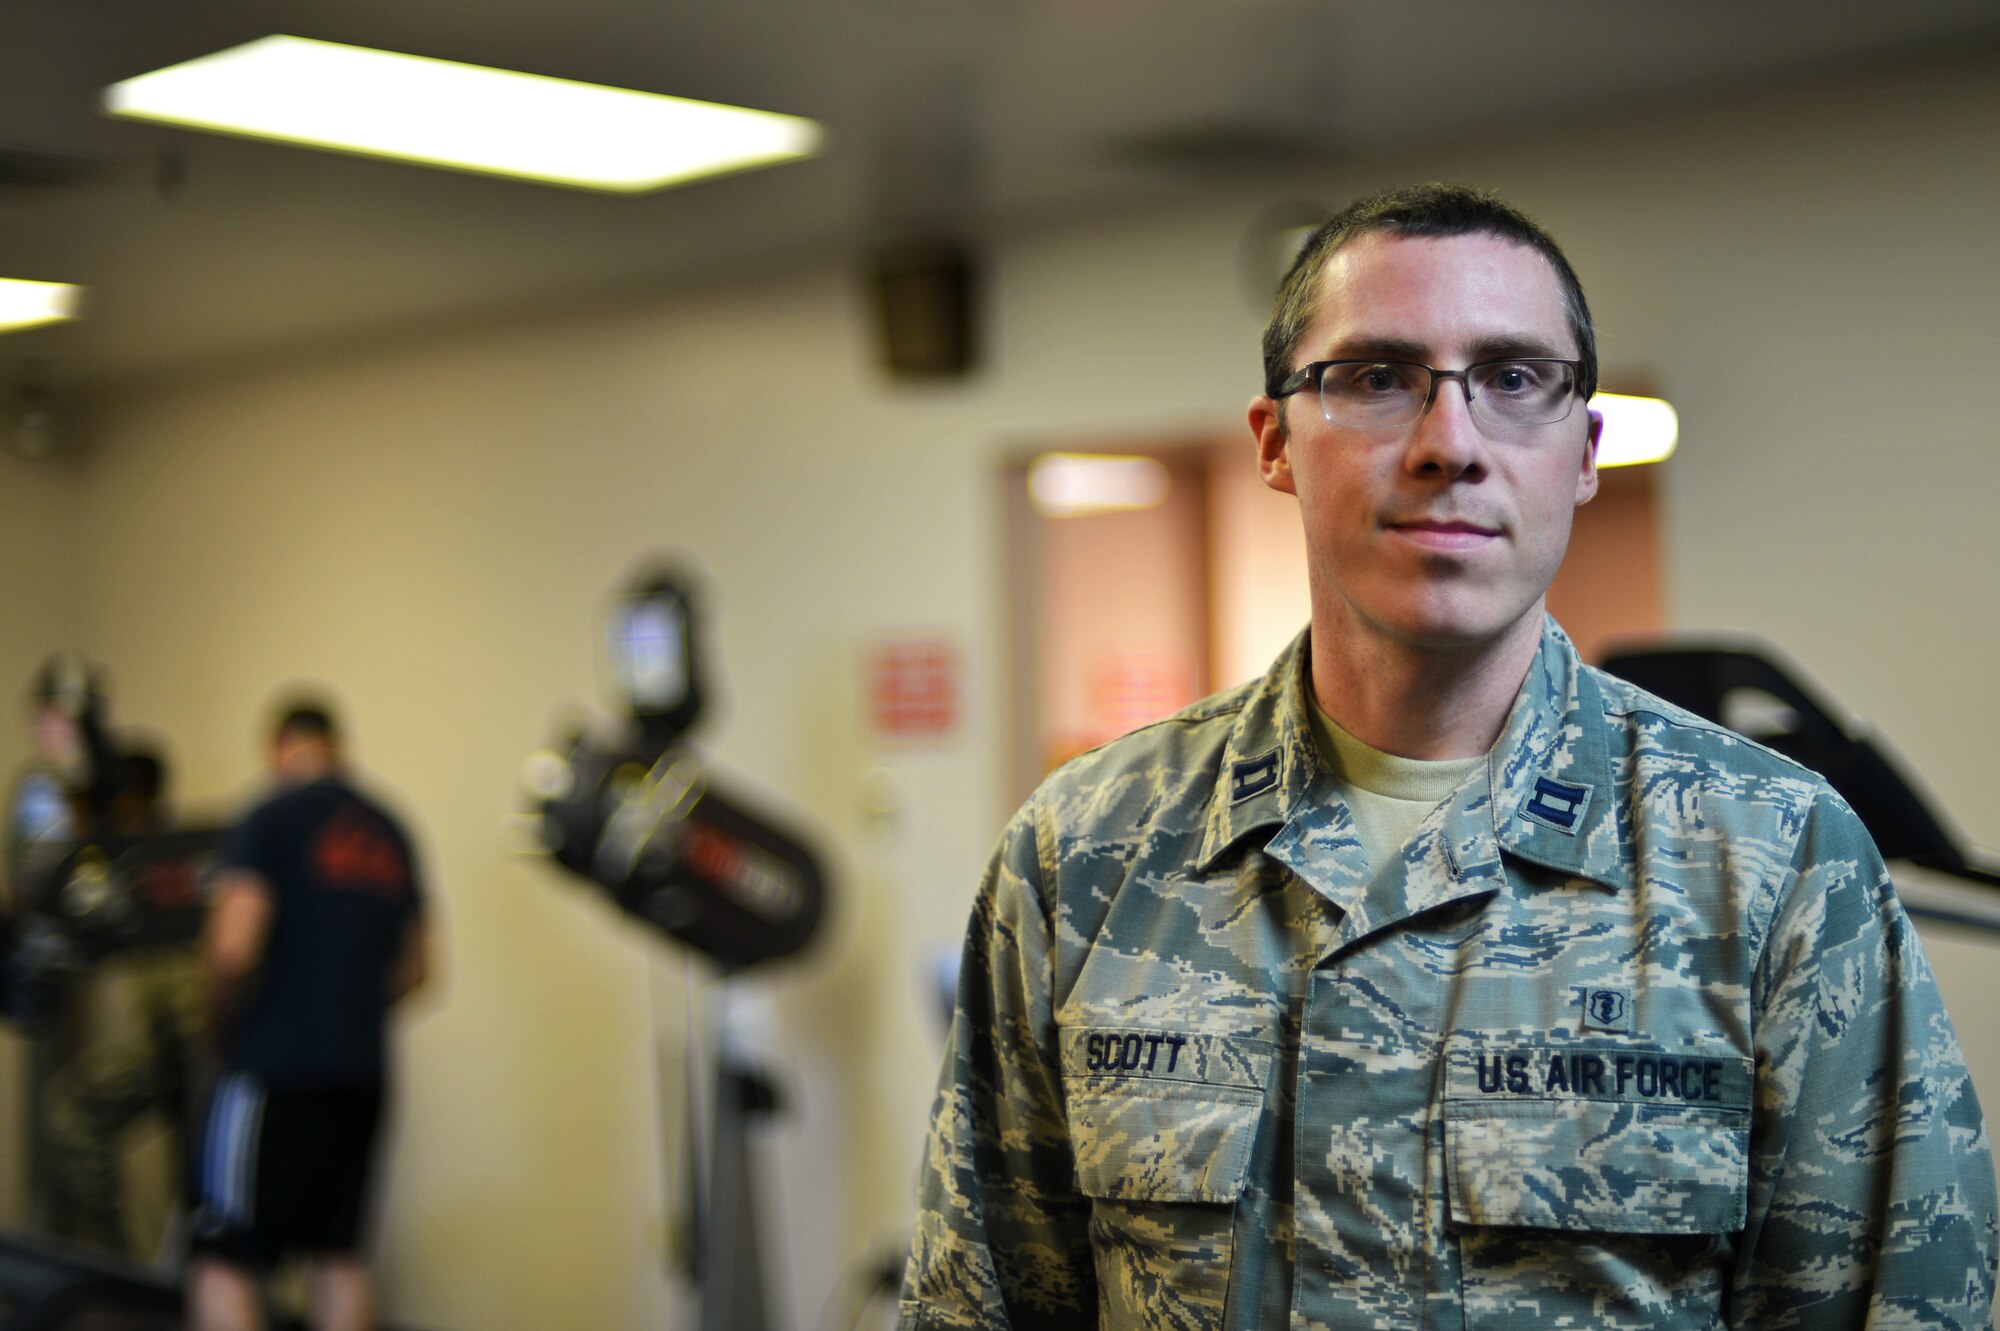 U.S. Air Force Capt. Ryan Scott, 20th Medical Group physical therapist, poses for a photo at Shaw Air Force Base, S.C., Aug. 1, 2016. Scott assists the Airmen, Soldiers and dependents on base who go through physical therapy by providing various workouts, stretches, and exercises for them. (U.S. Air Force photo by Airman 1st Class Christopher Maldonado)